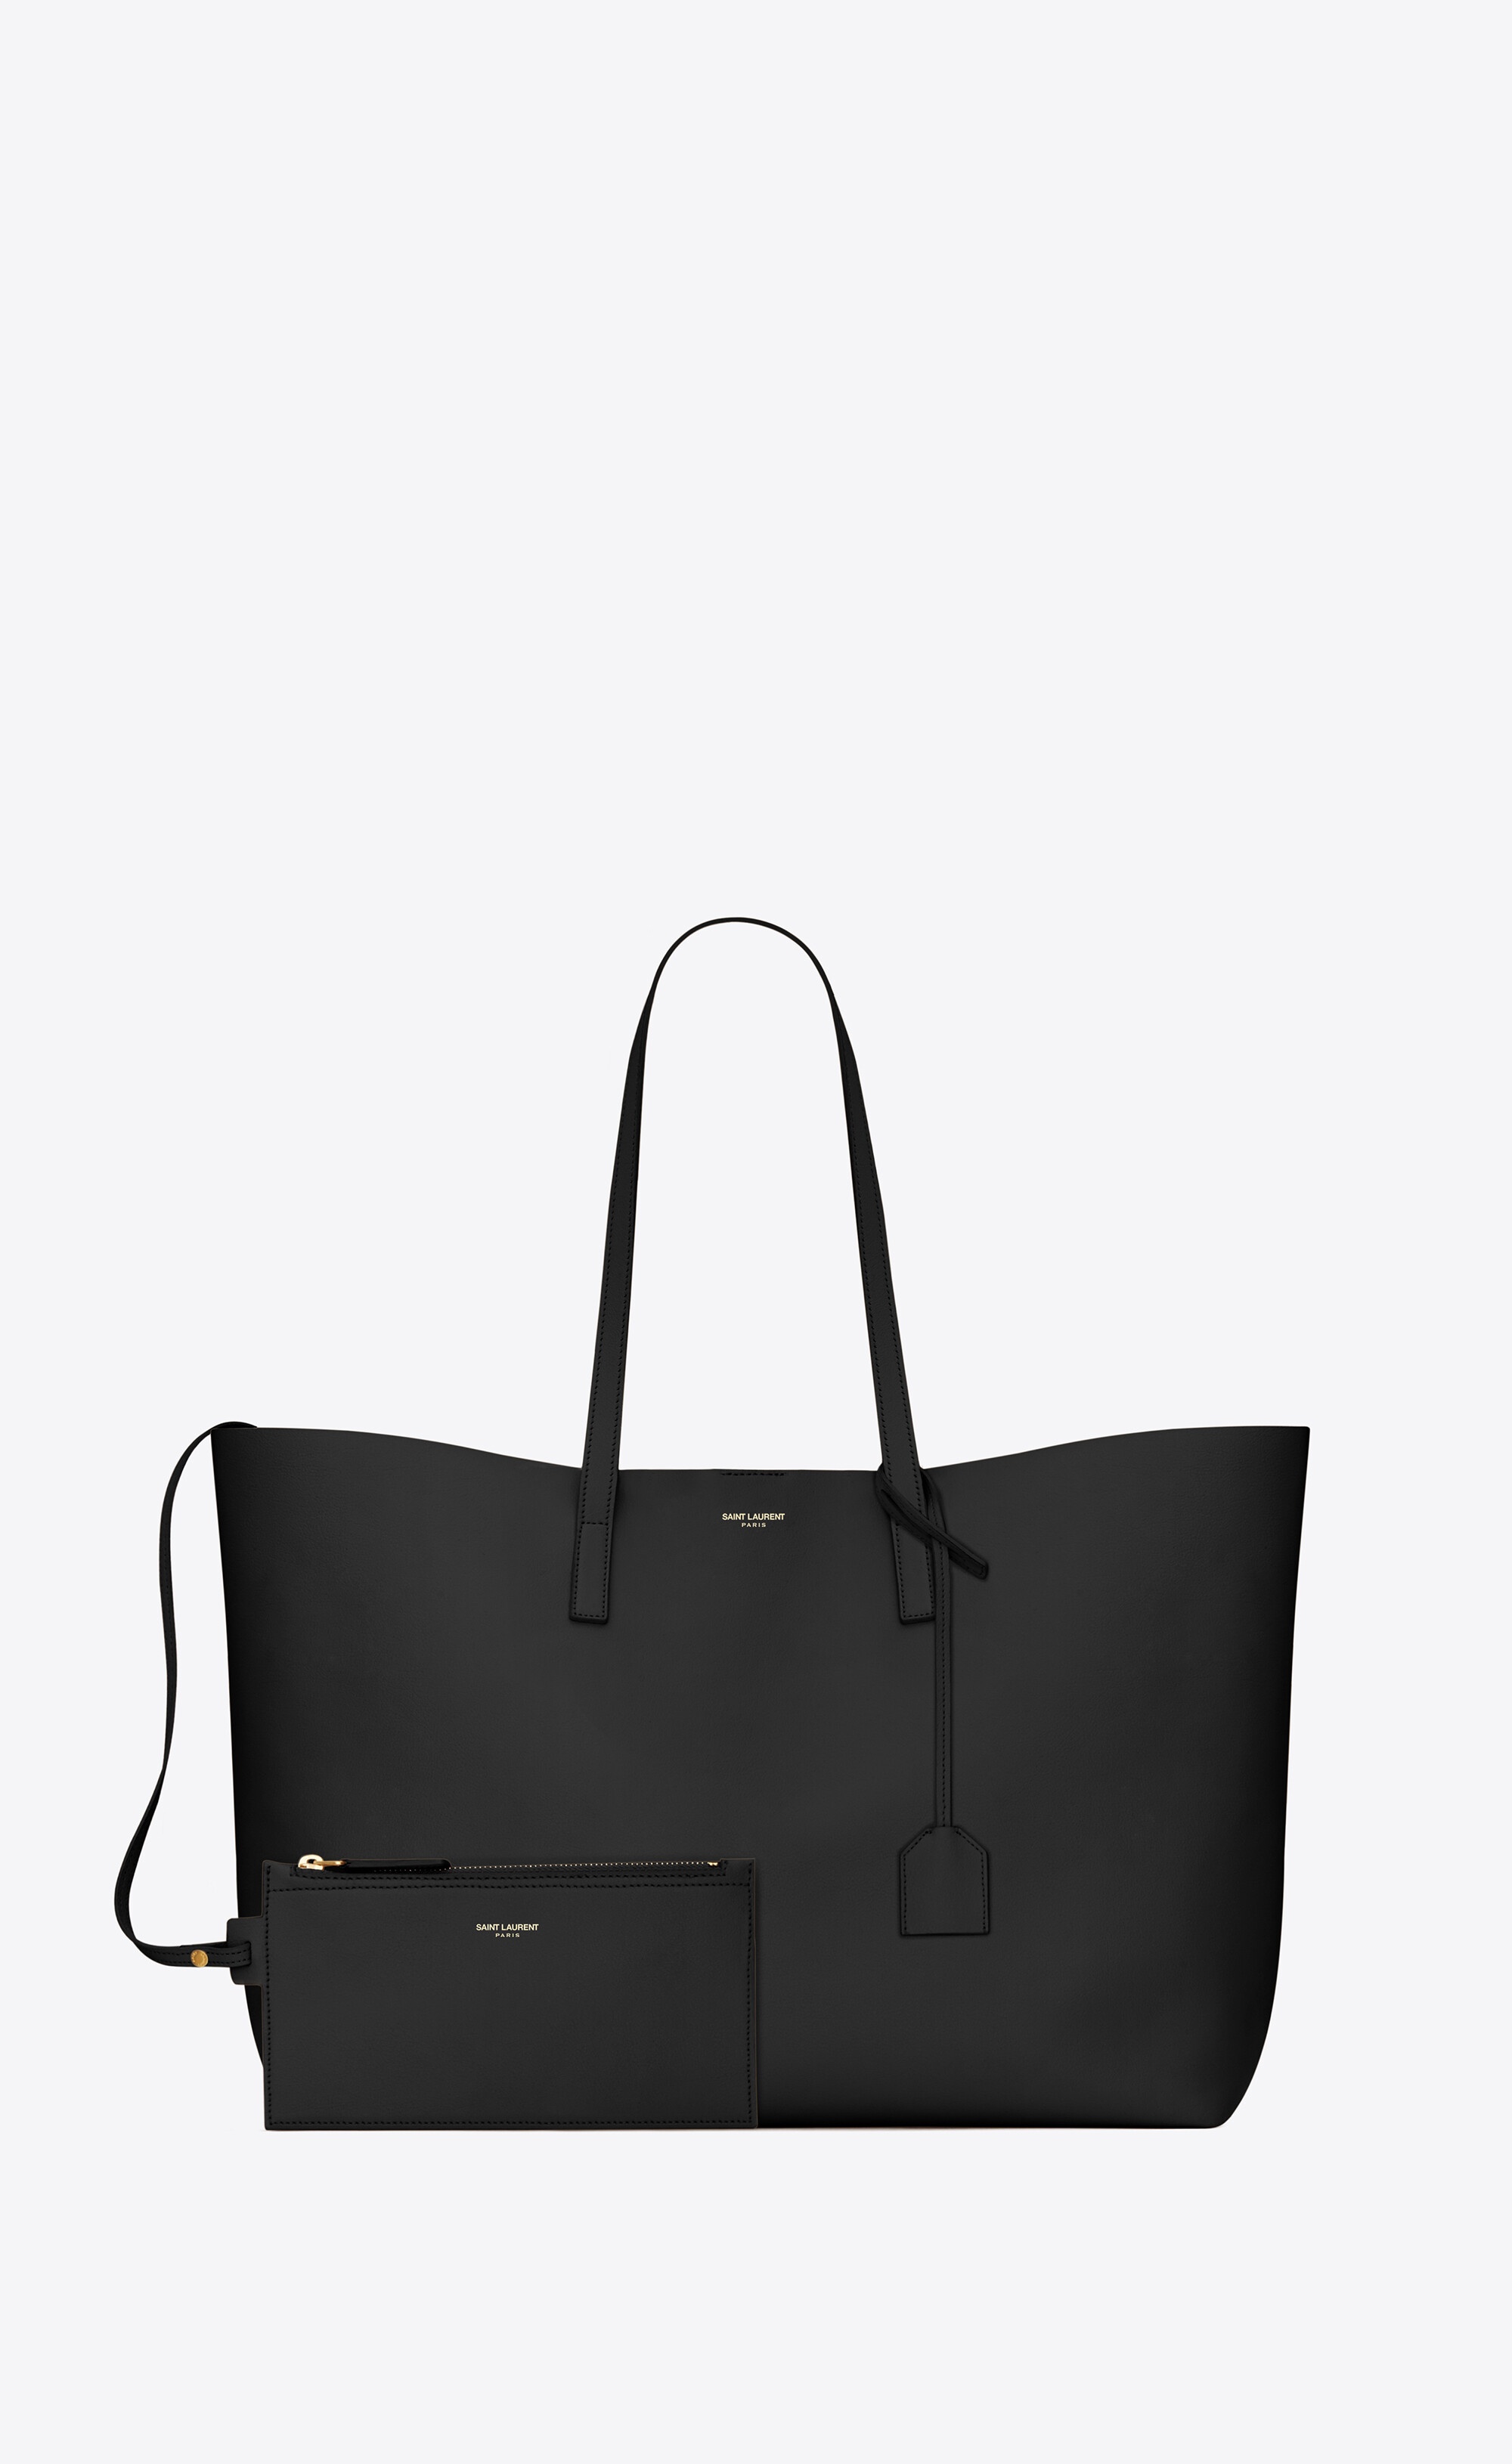 shopping saint laurent e/w in supple leather - 3